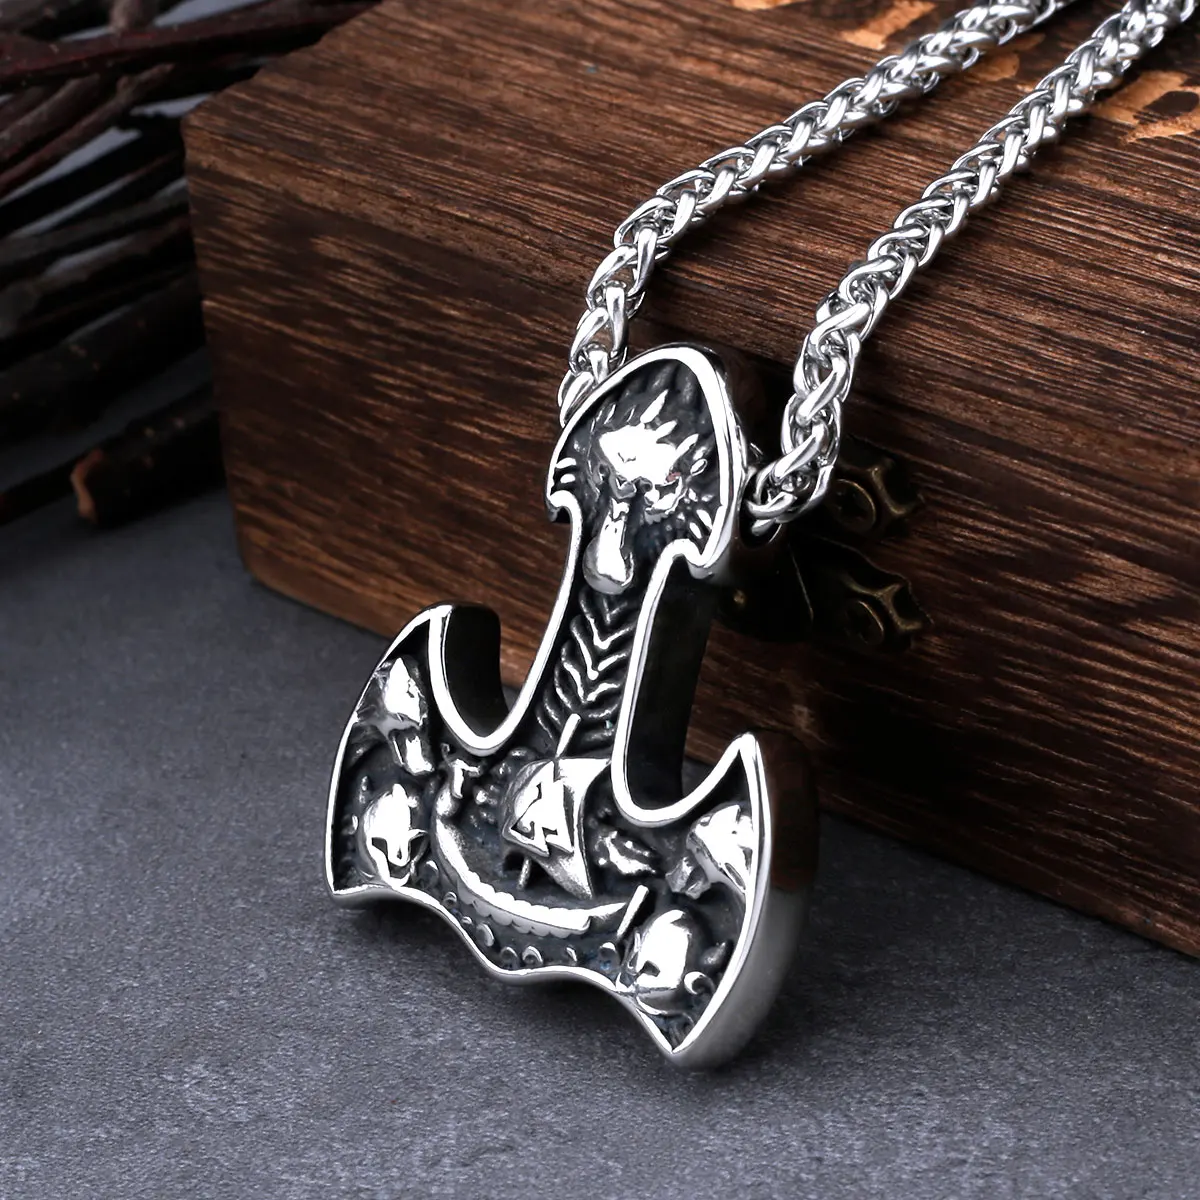 

Nordic Viking Warrior Wolf Axe Necklace Men's Stainless Steel Thor's Hammer Rune Amulet Fashion Pendant Necklace Charm Jewelry